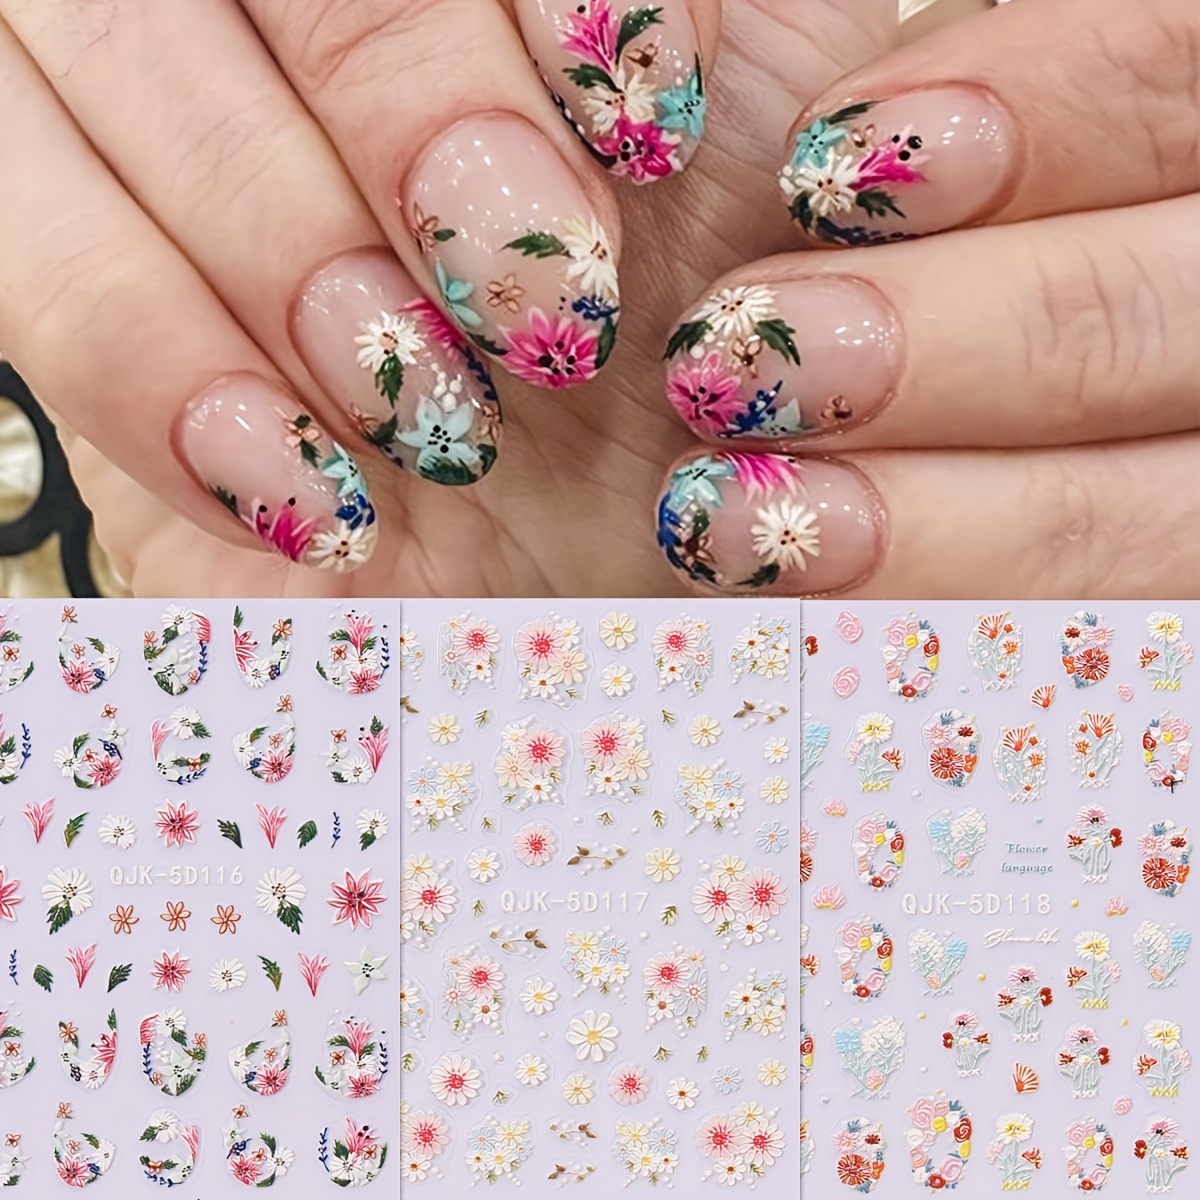 

3-pack Spring & Summer Floral 5d Embossed French Nail Art Stickers - Self-adhesive, Sparkle Finish Decals For Hands, Feet & Nails Nail Stickers Nail Accessories